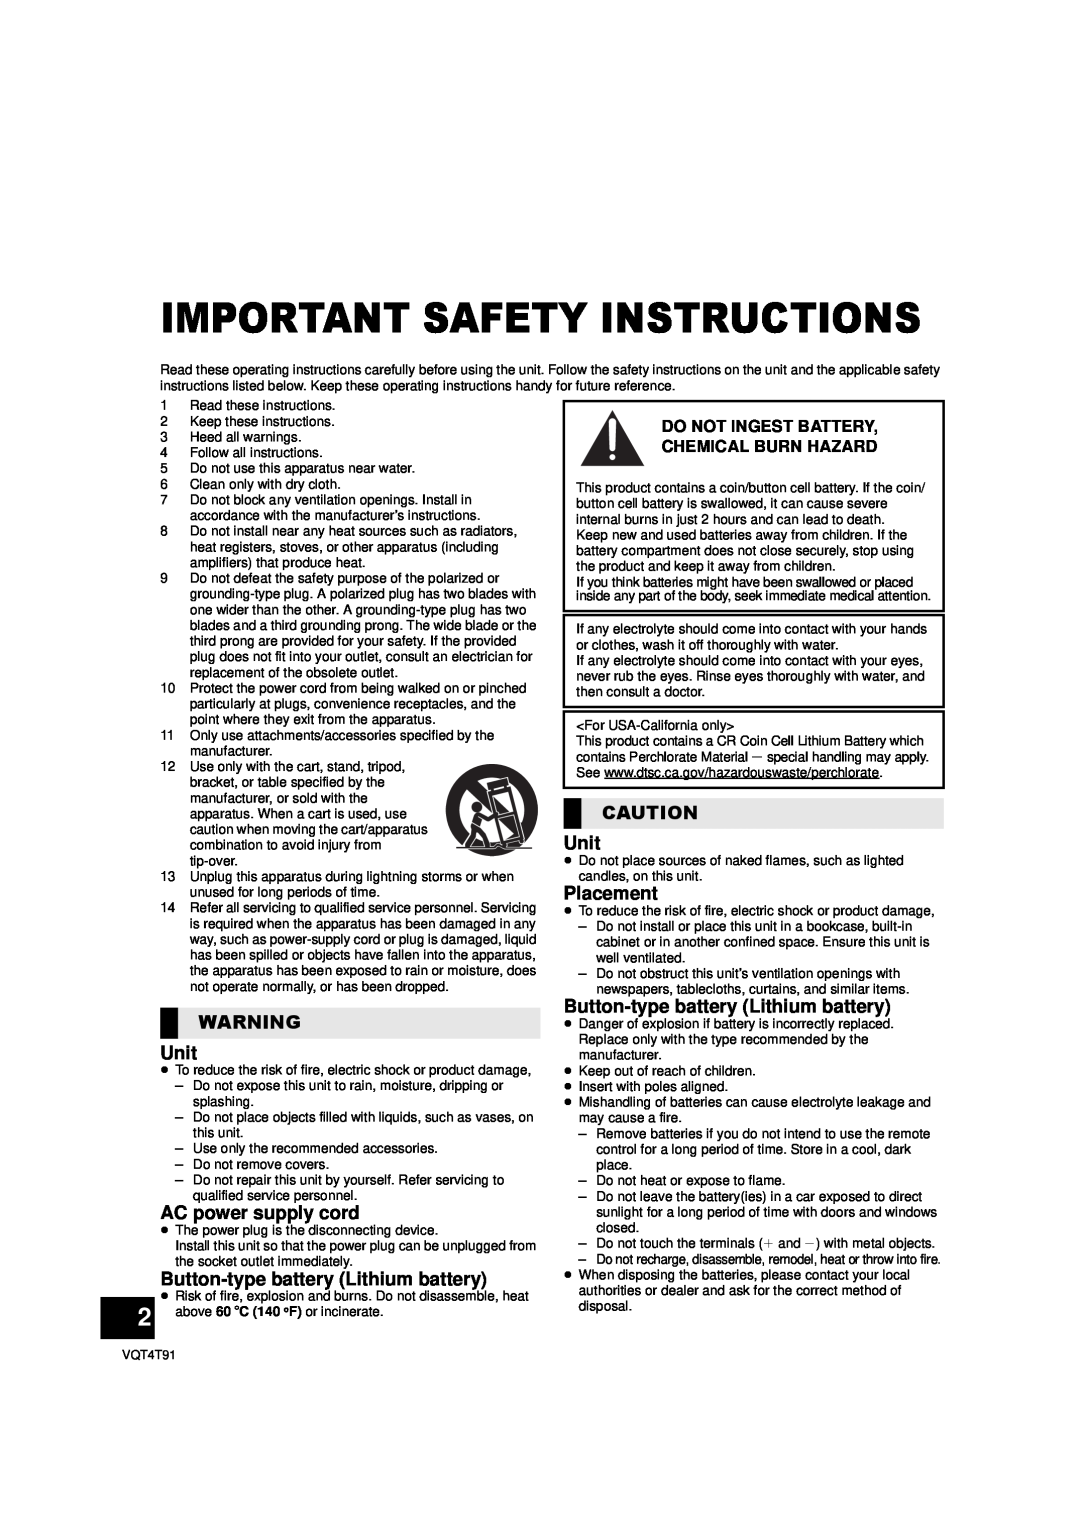 Panasonic SC-NE1 Unit, AC power supply cord, Button-typebattery Lithium battery, Placement, Important Safety Instructions 